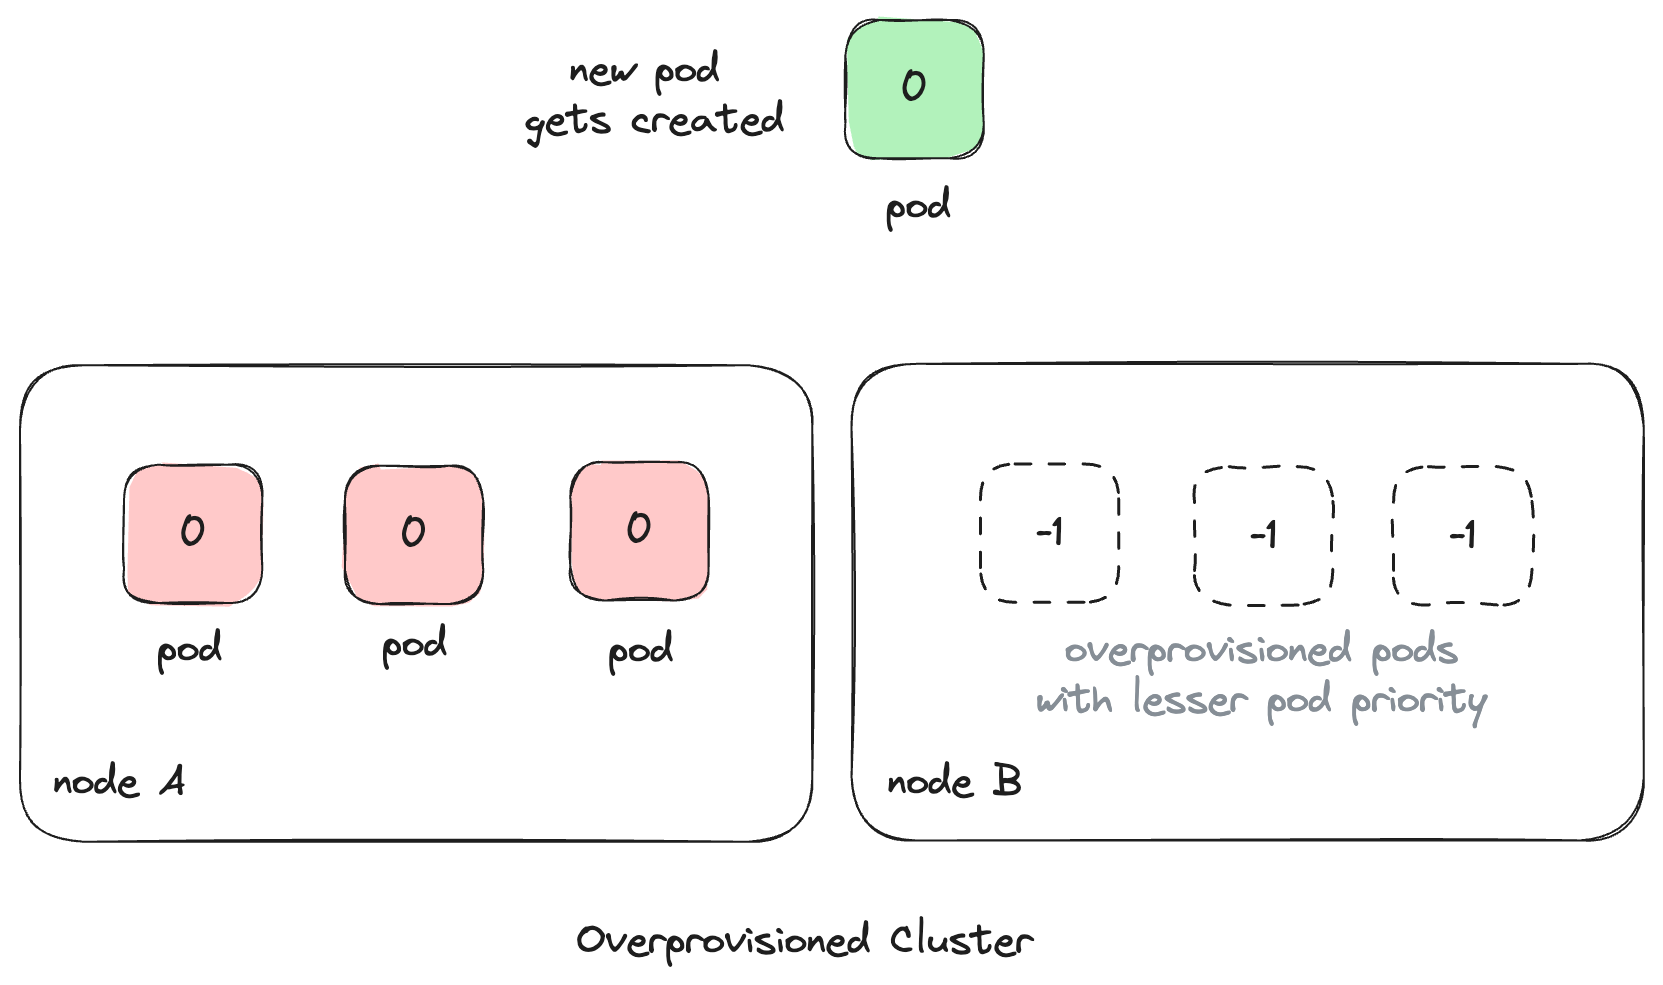 Illustration of a new pod getting created in an overprovisioned cluster